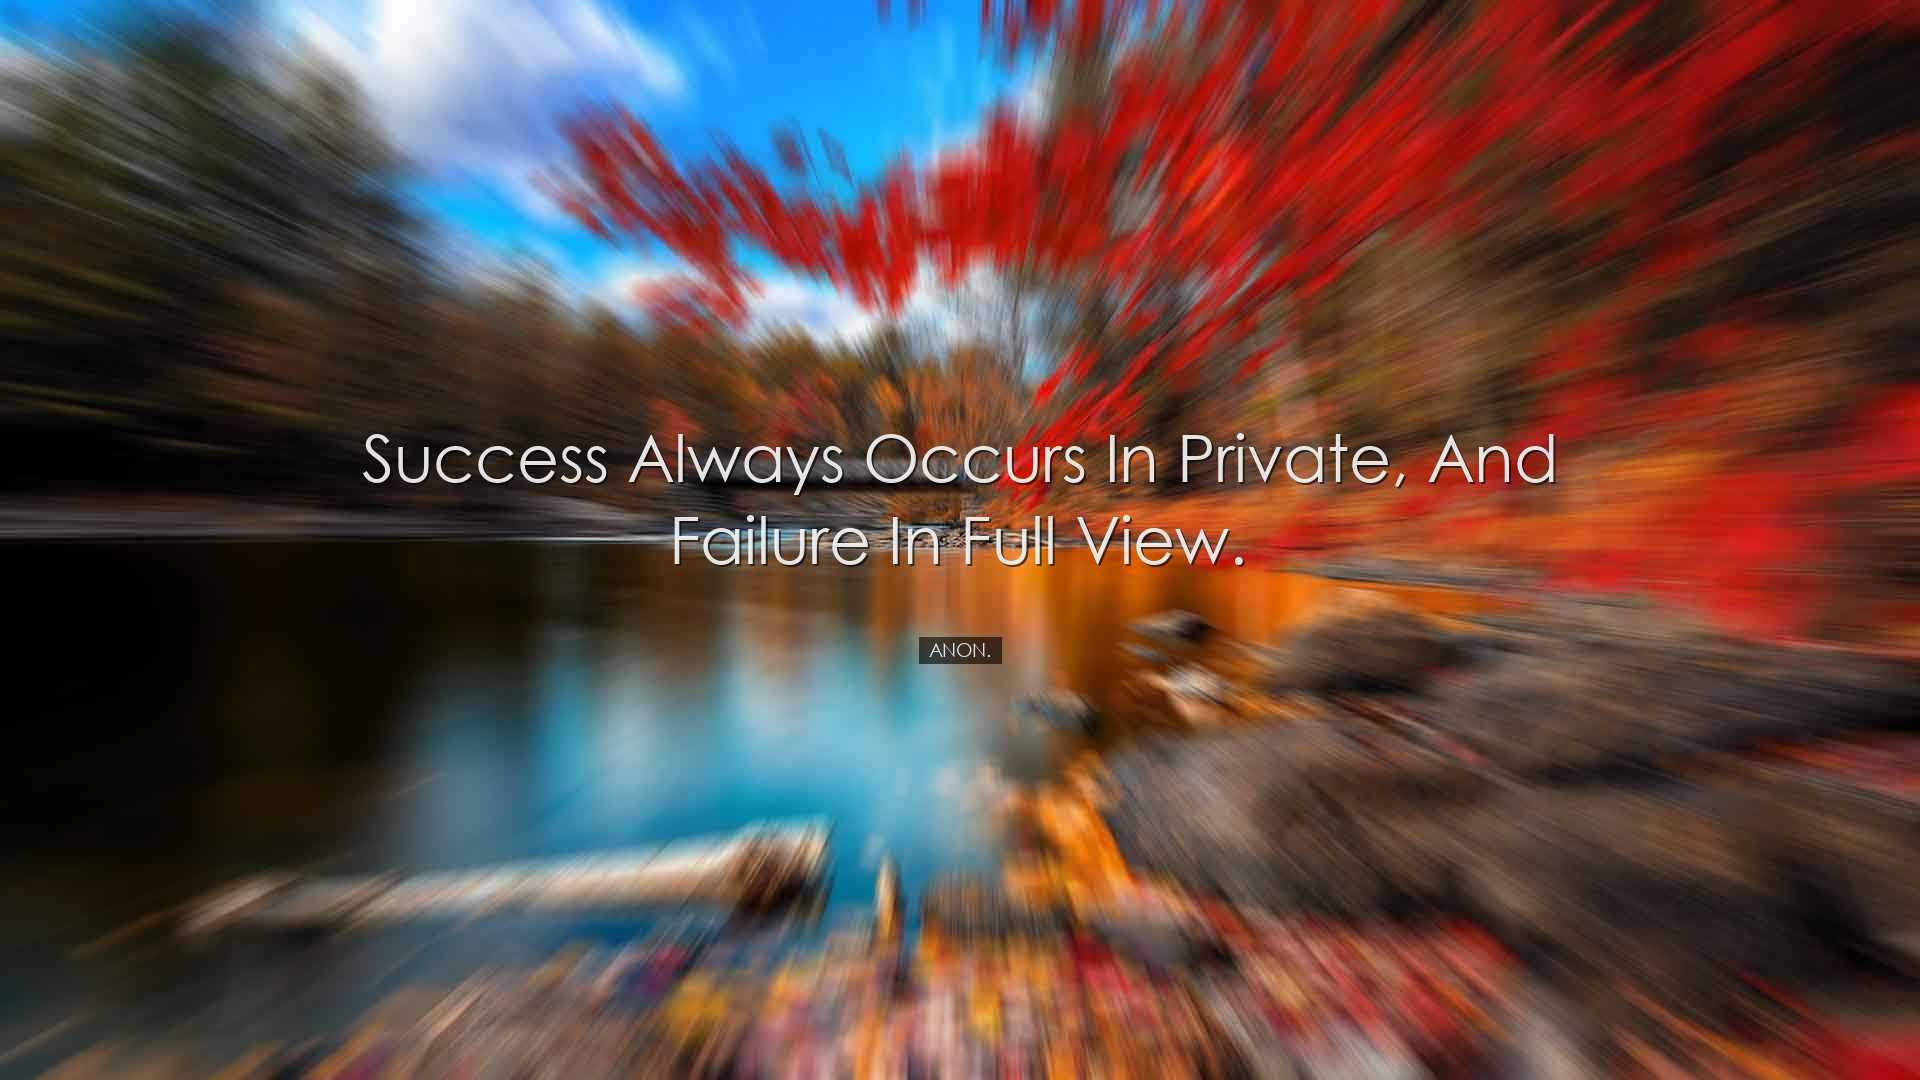 Success always occurs in private, and failure in full view. - Anon